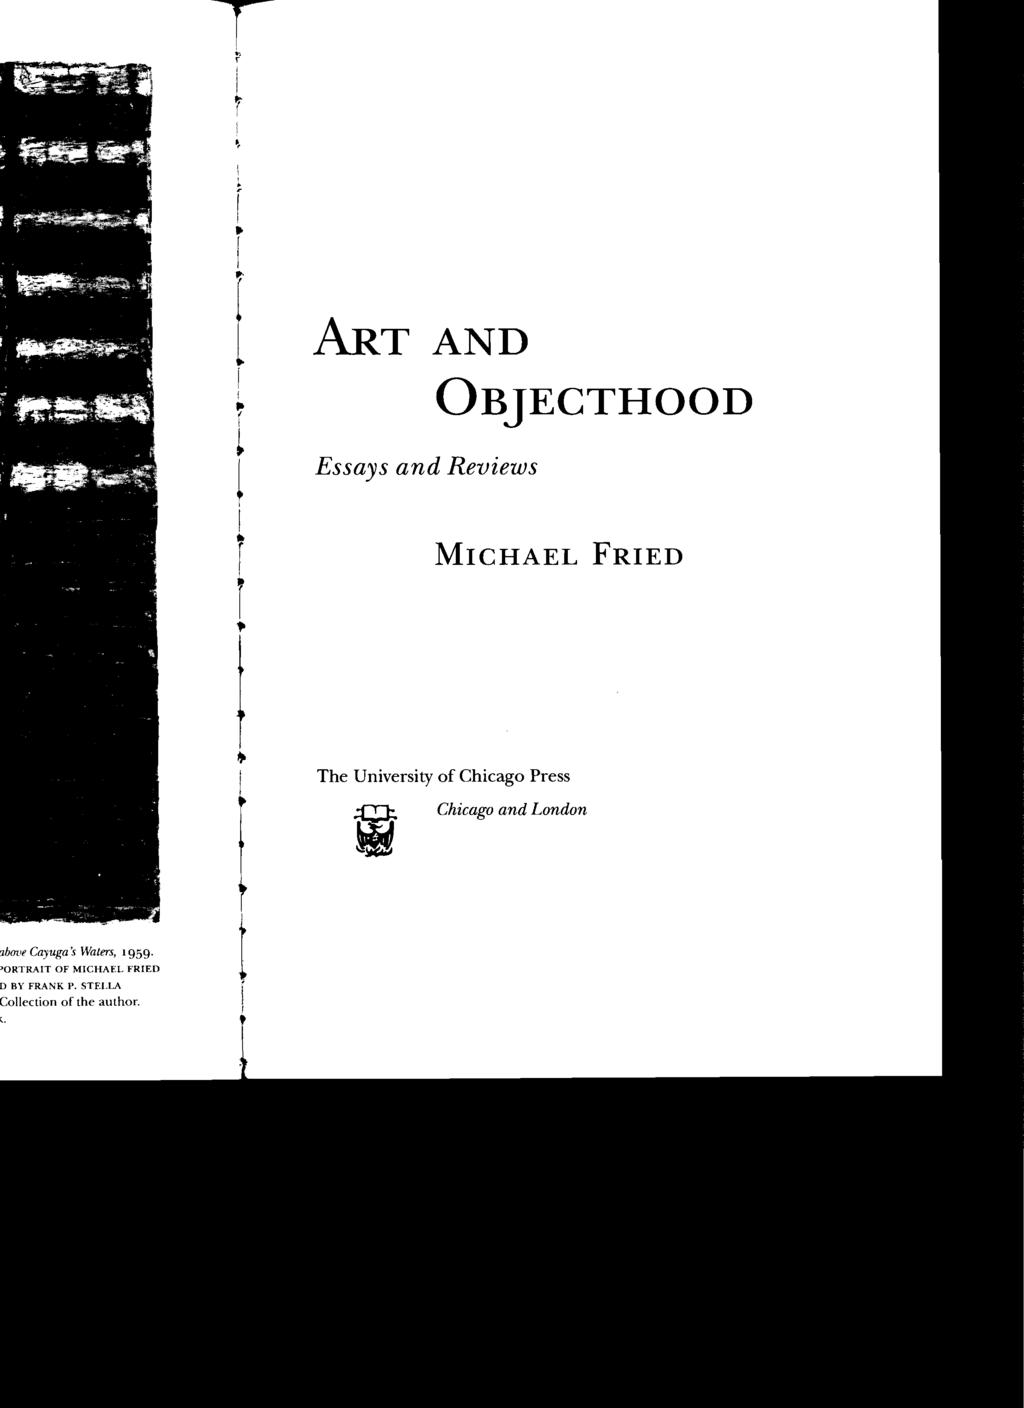 ART AND Essays and Reviews ÜBJECTHOOD MICHAEL FRIED